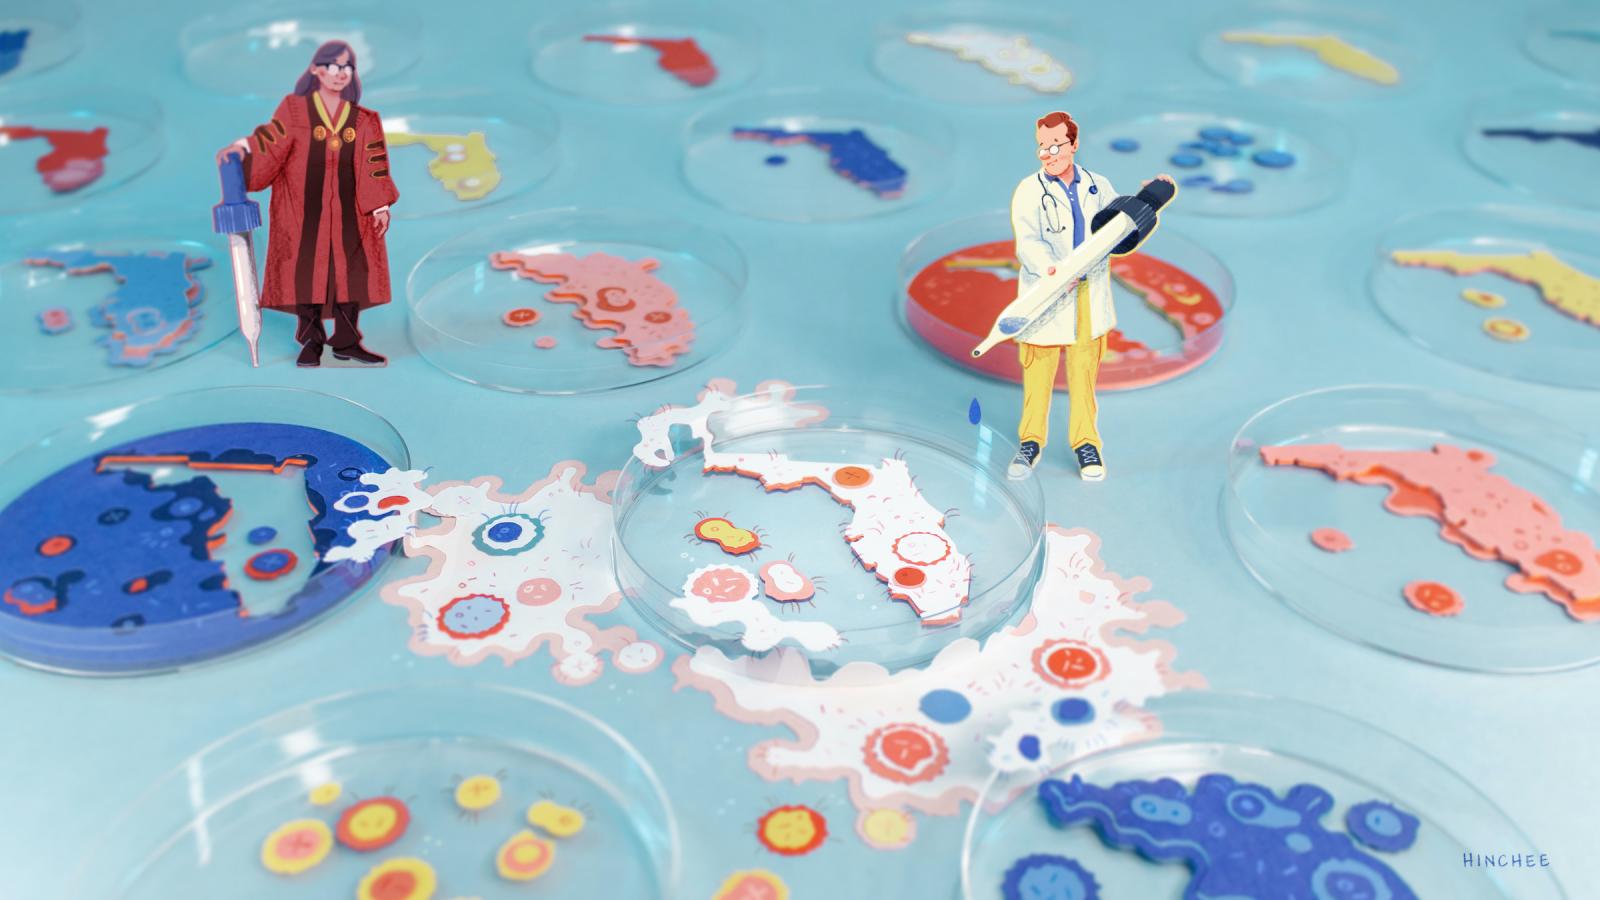 A tiny scientist and professor overlook a field of petri dishes with Florida-shaped matter in each dish